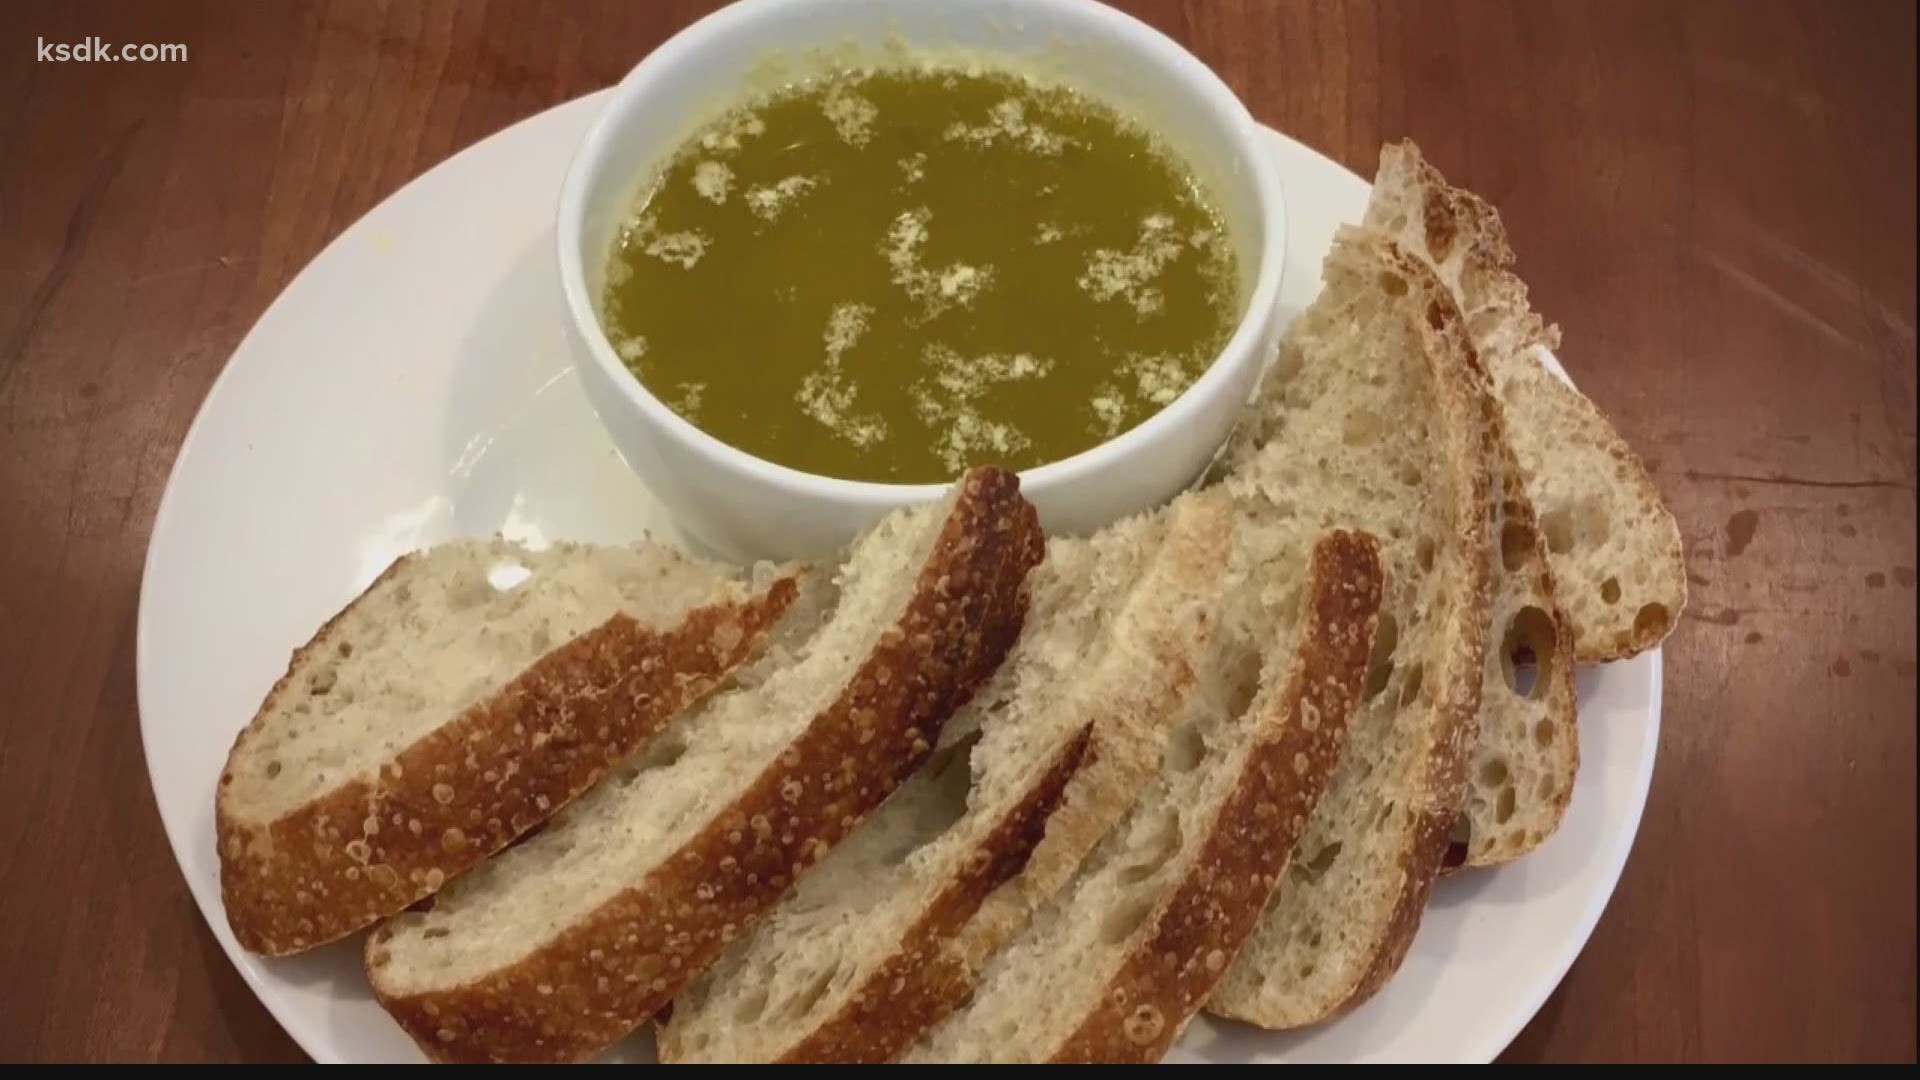 Tim Nordmann, owner of Mr. Meowski’s Sourdough, shares a family recipe for a traditional Italian dip.